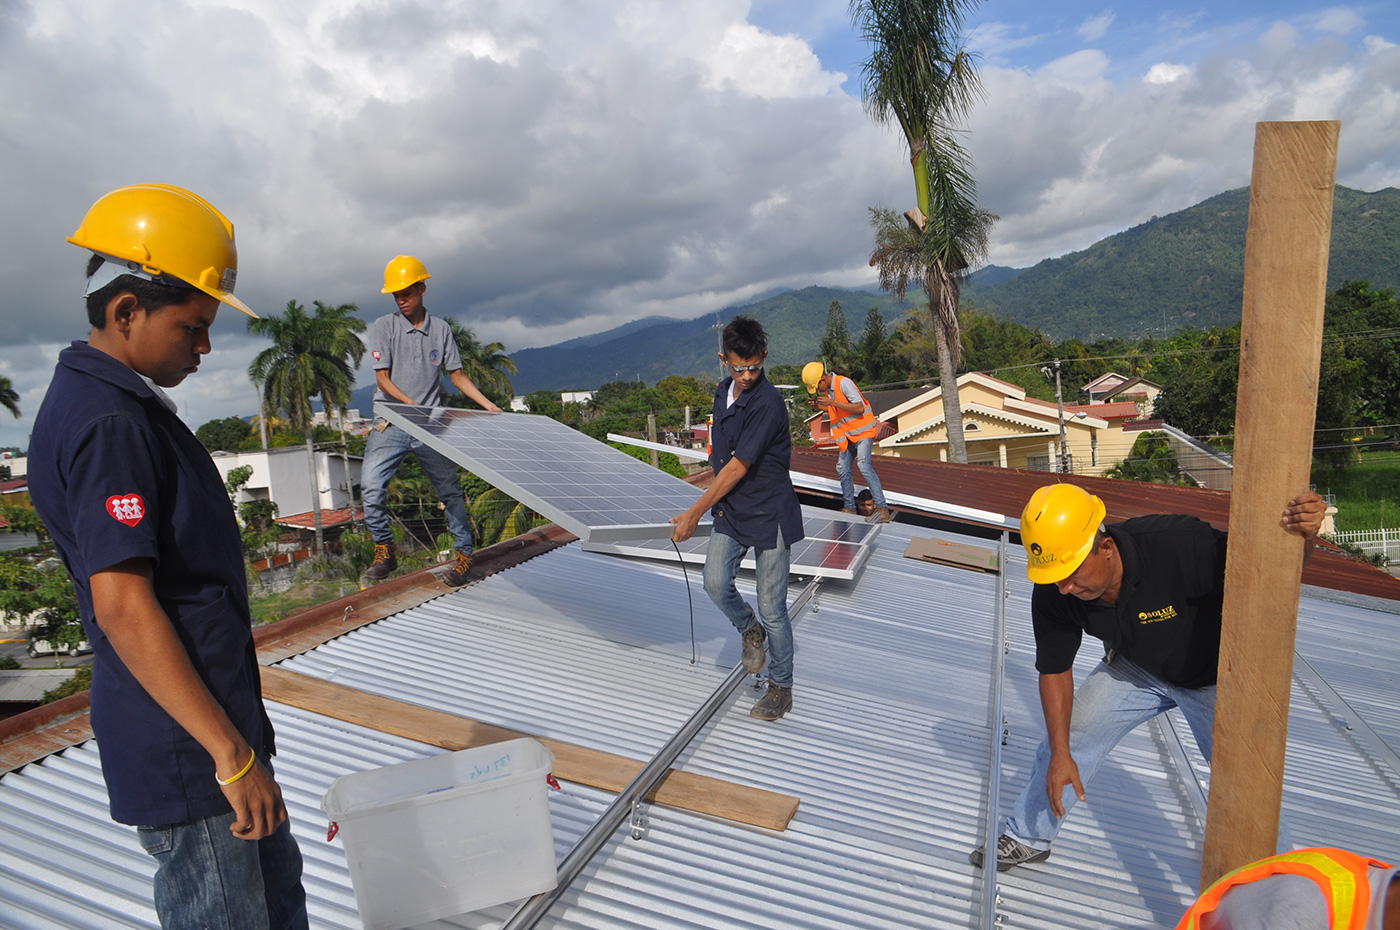 Students helped installed a solar PV system in a trade school that receives at-risk youth who left traditional academic schools looking for alternative trade skill training. This system helped reduce operating costs at the school, allowing the institute to utilize those funds to support educational programs.